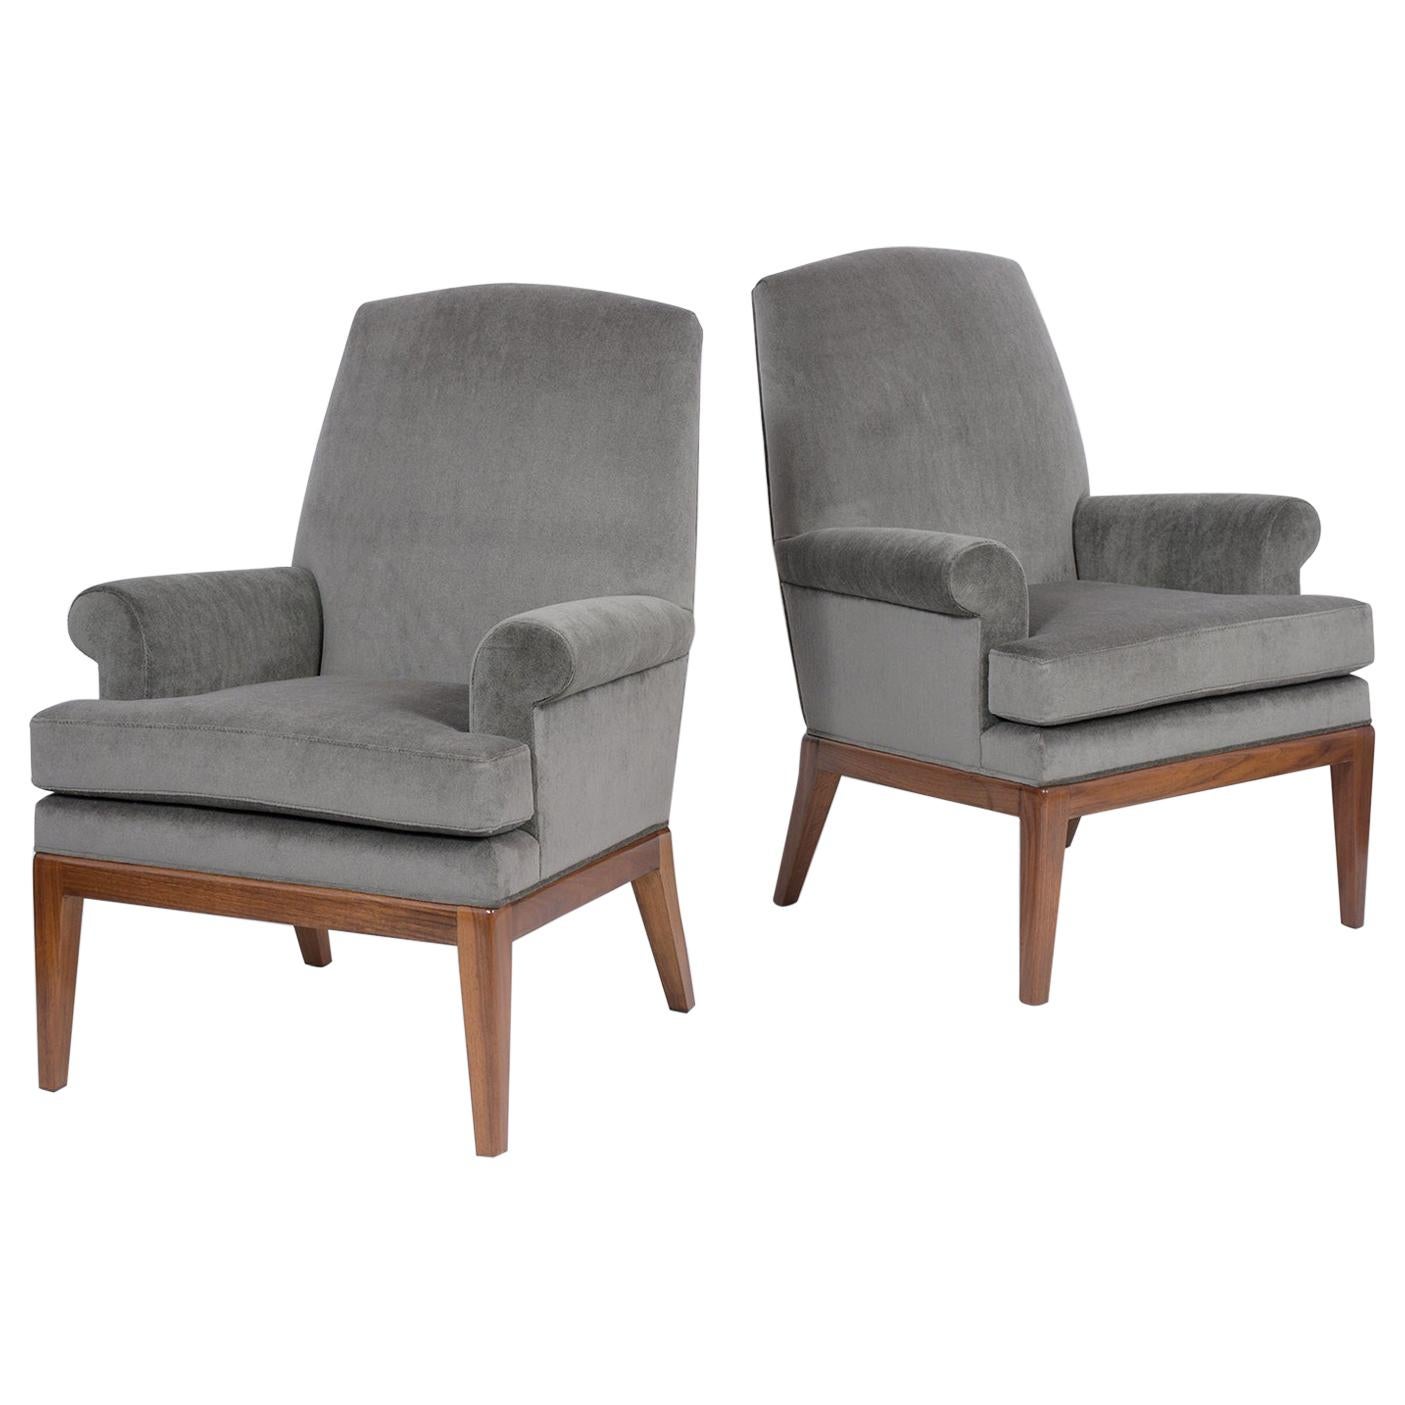 Pair of Vintage Danish Style Lounge Chairs